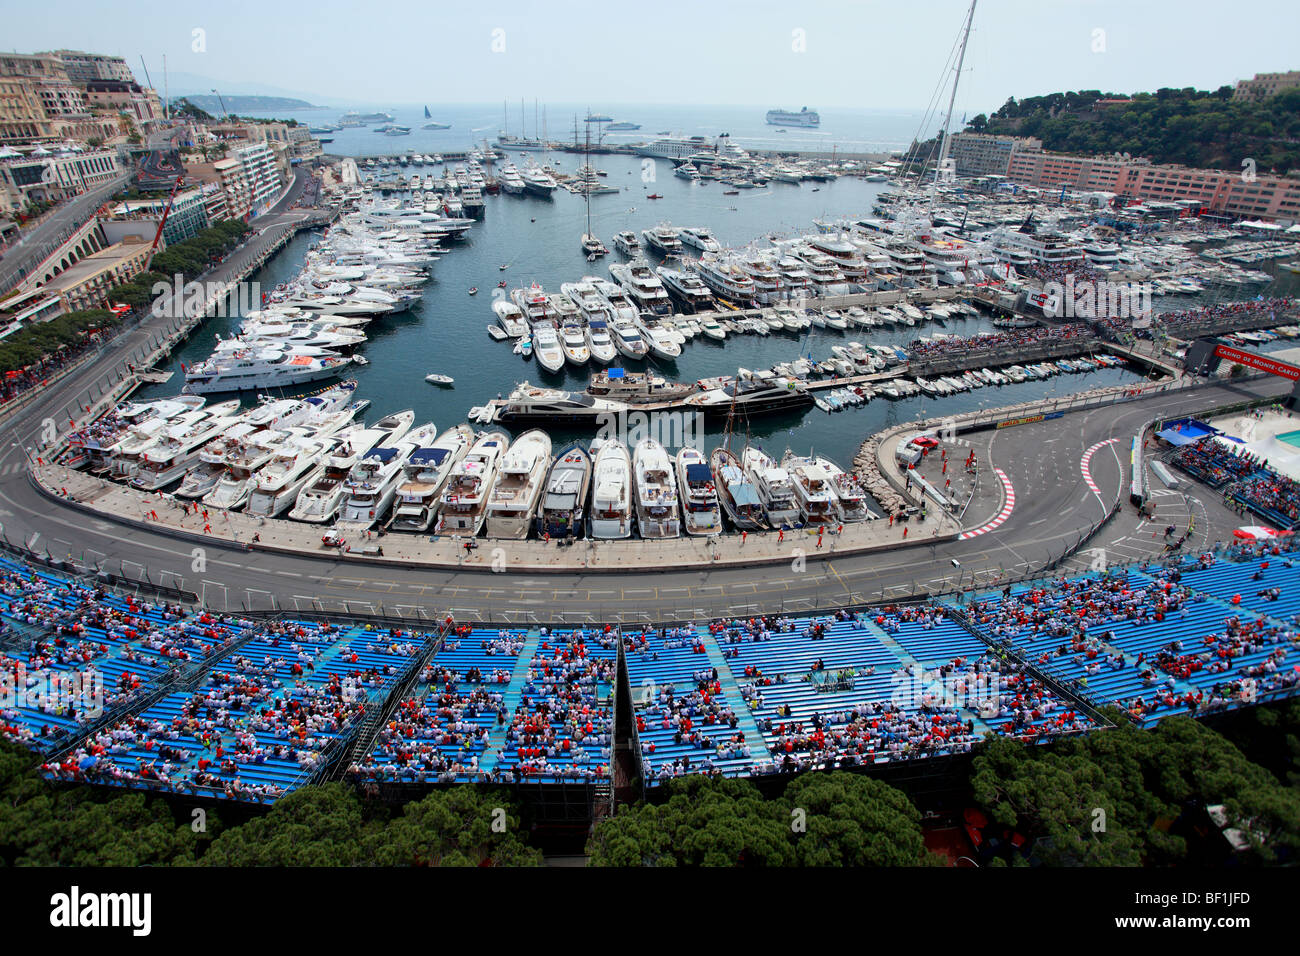 Overview Monaco Marina High Resolution Stock Photography and Images - Alamy